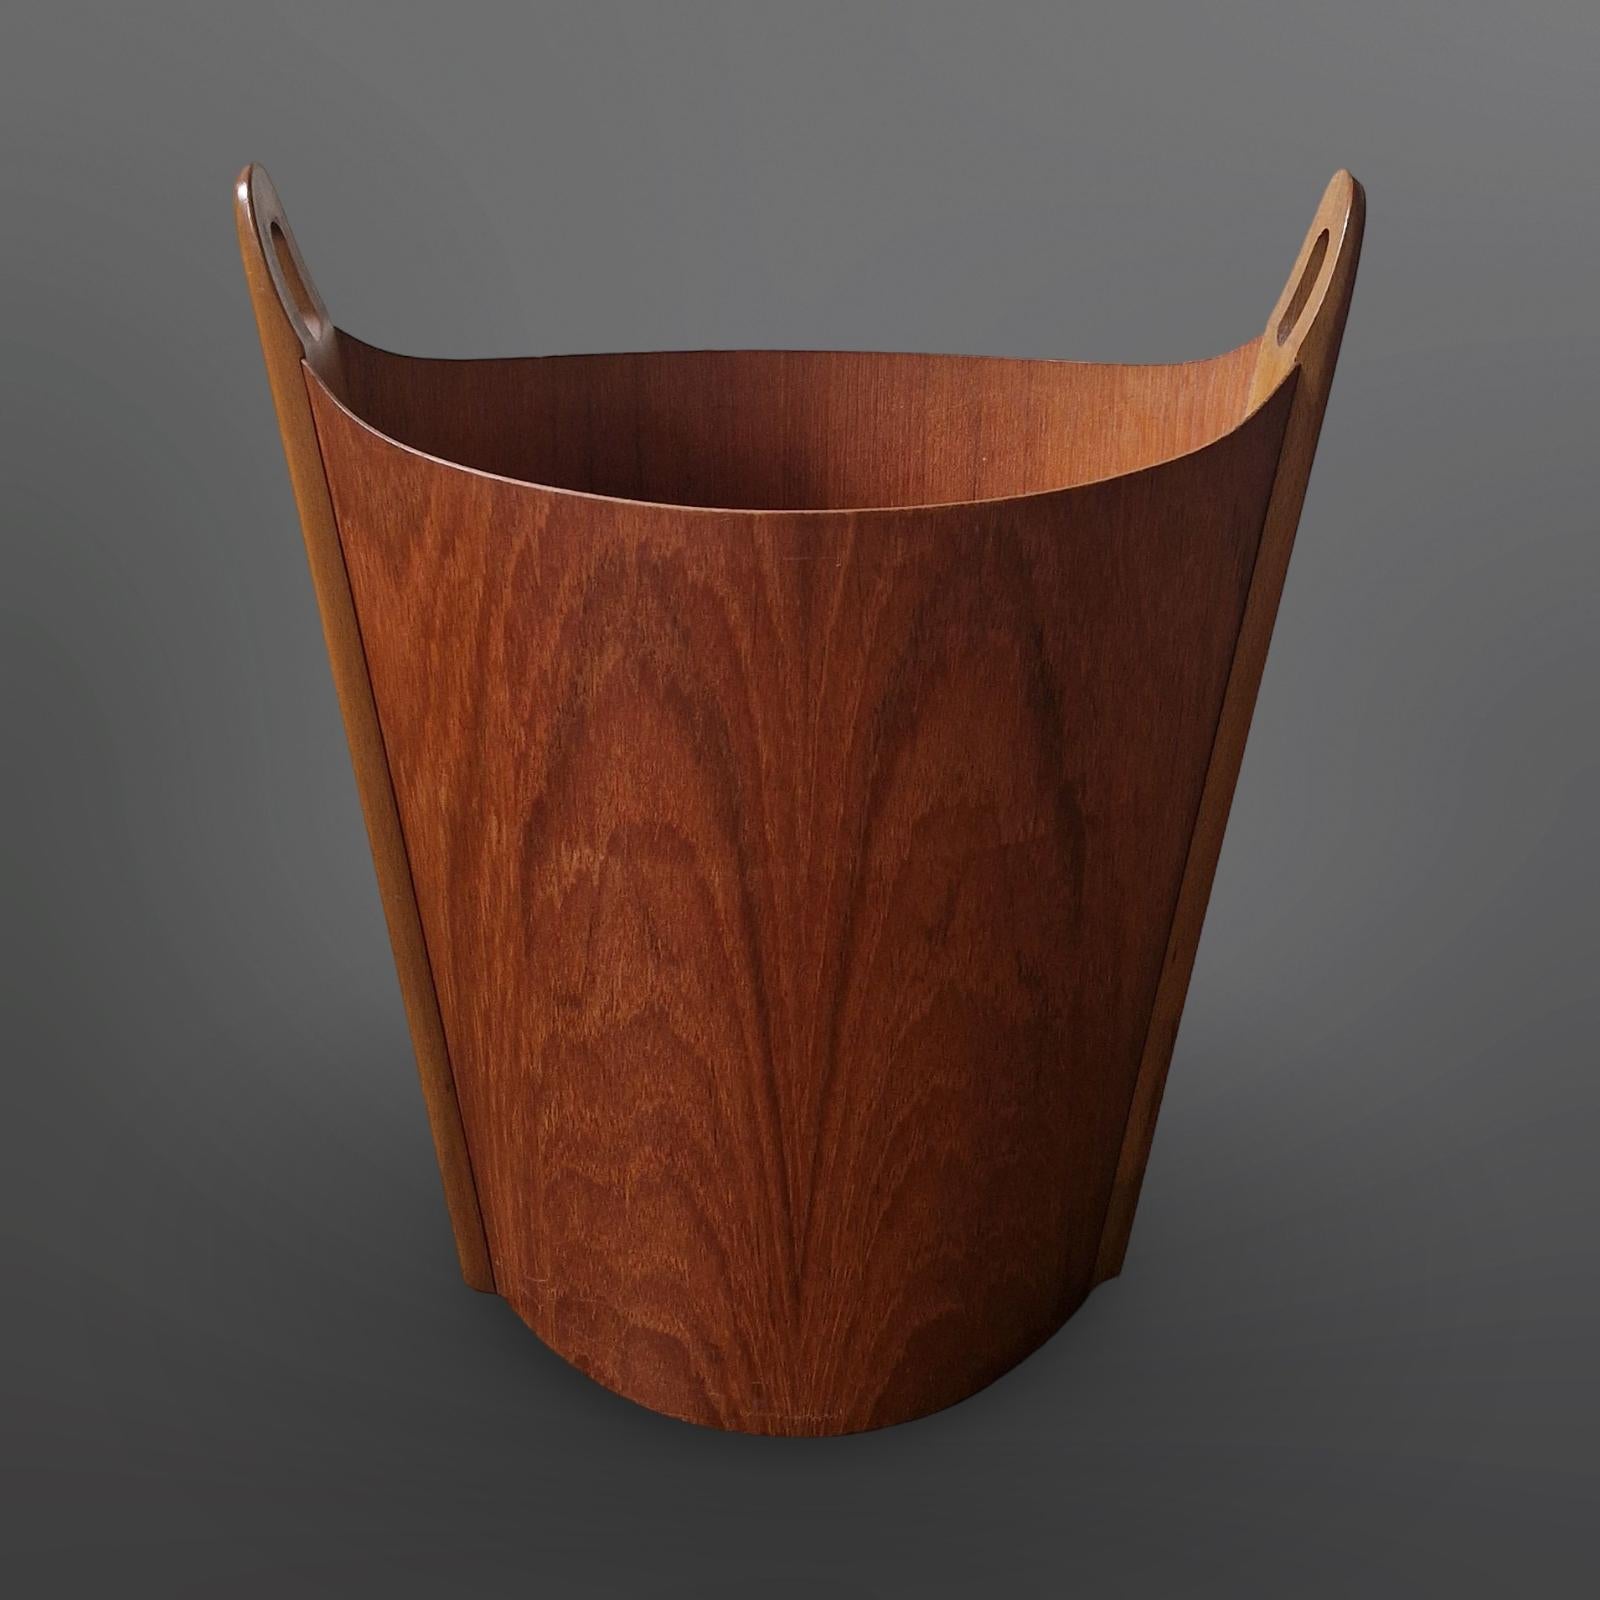 Scandinavian modern waste paper basket. Designed by Einar Barnes in the 1960s and made by P.S. Heggen. It is made from teak plywood and solid beech. It bears the makers mark on the bottom. Beautiful sculptural design that is not only useful but a